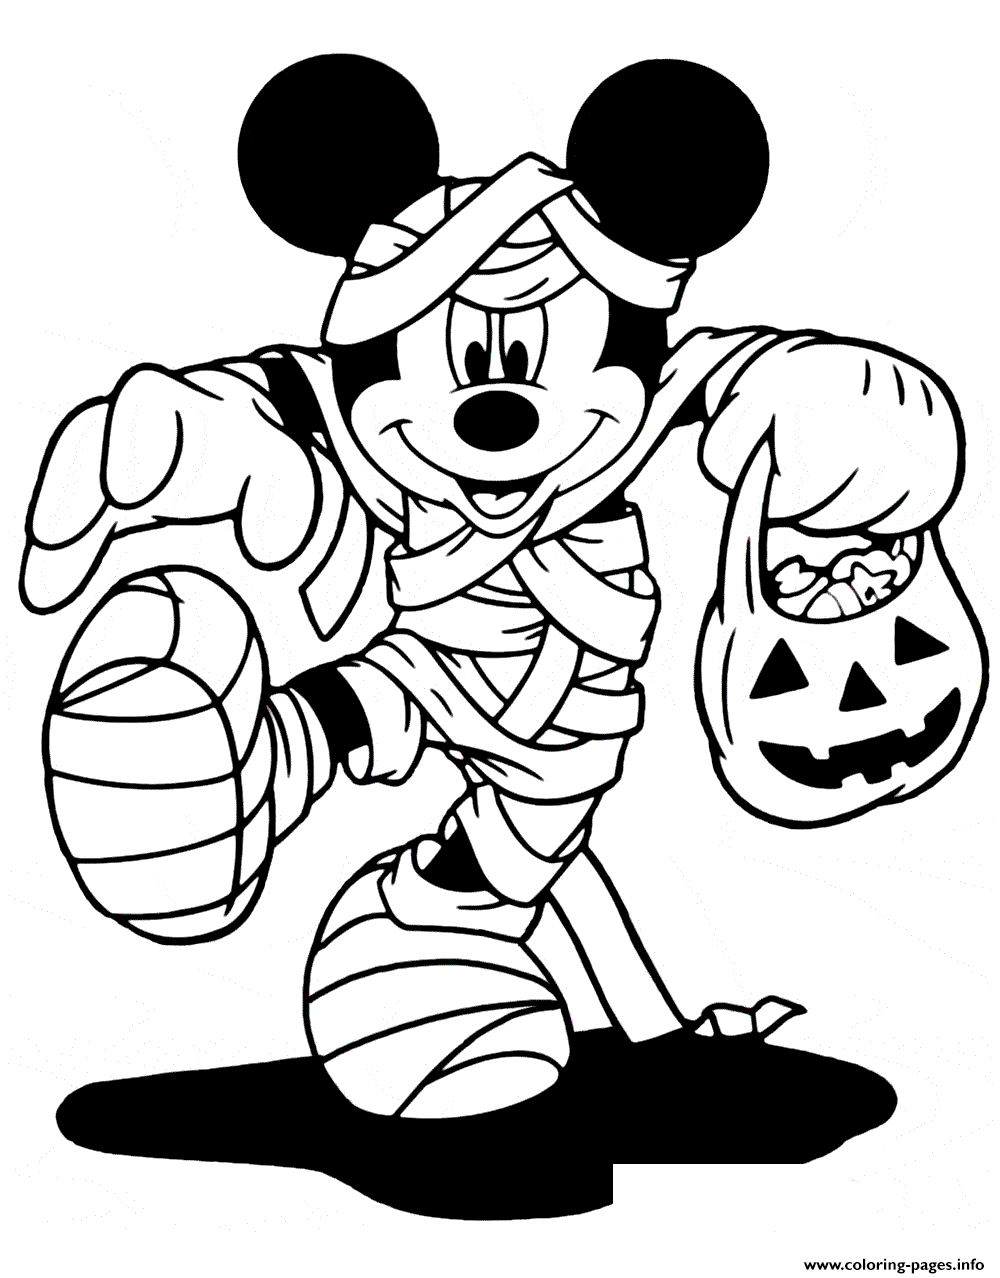 Trick Or Treats With Mickey The Mummy Coloring Page